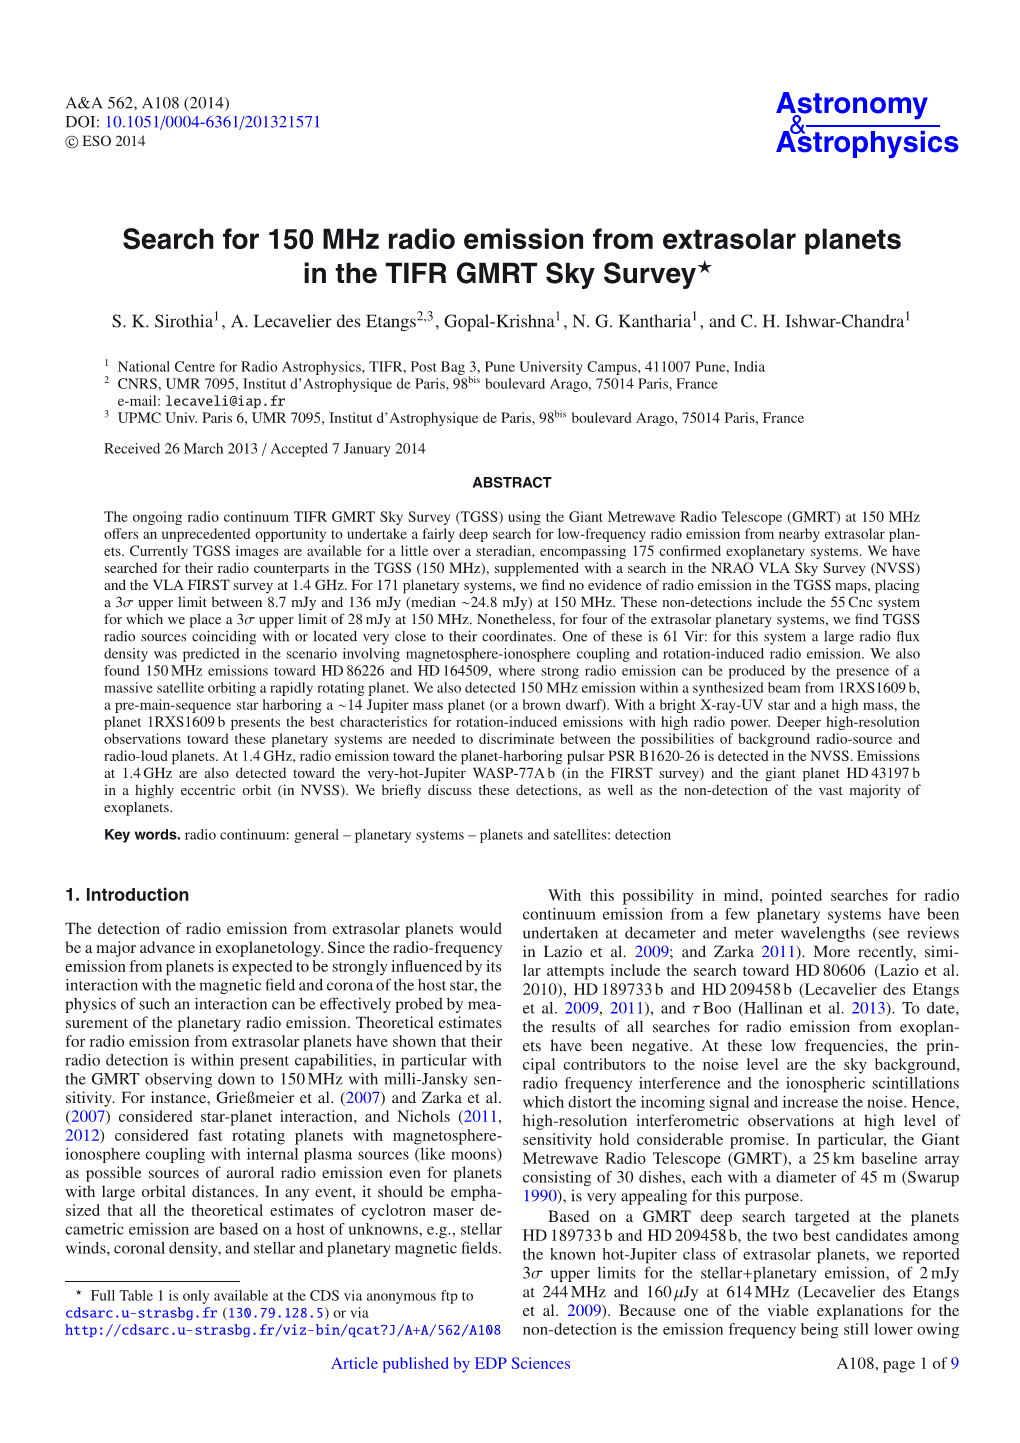 Search for 150 Mhz Radio Emission from Extrasolar Planets in the TIFR GMRT Sky Survey